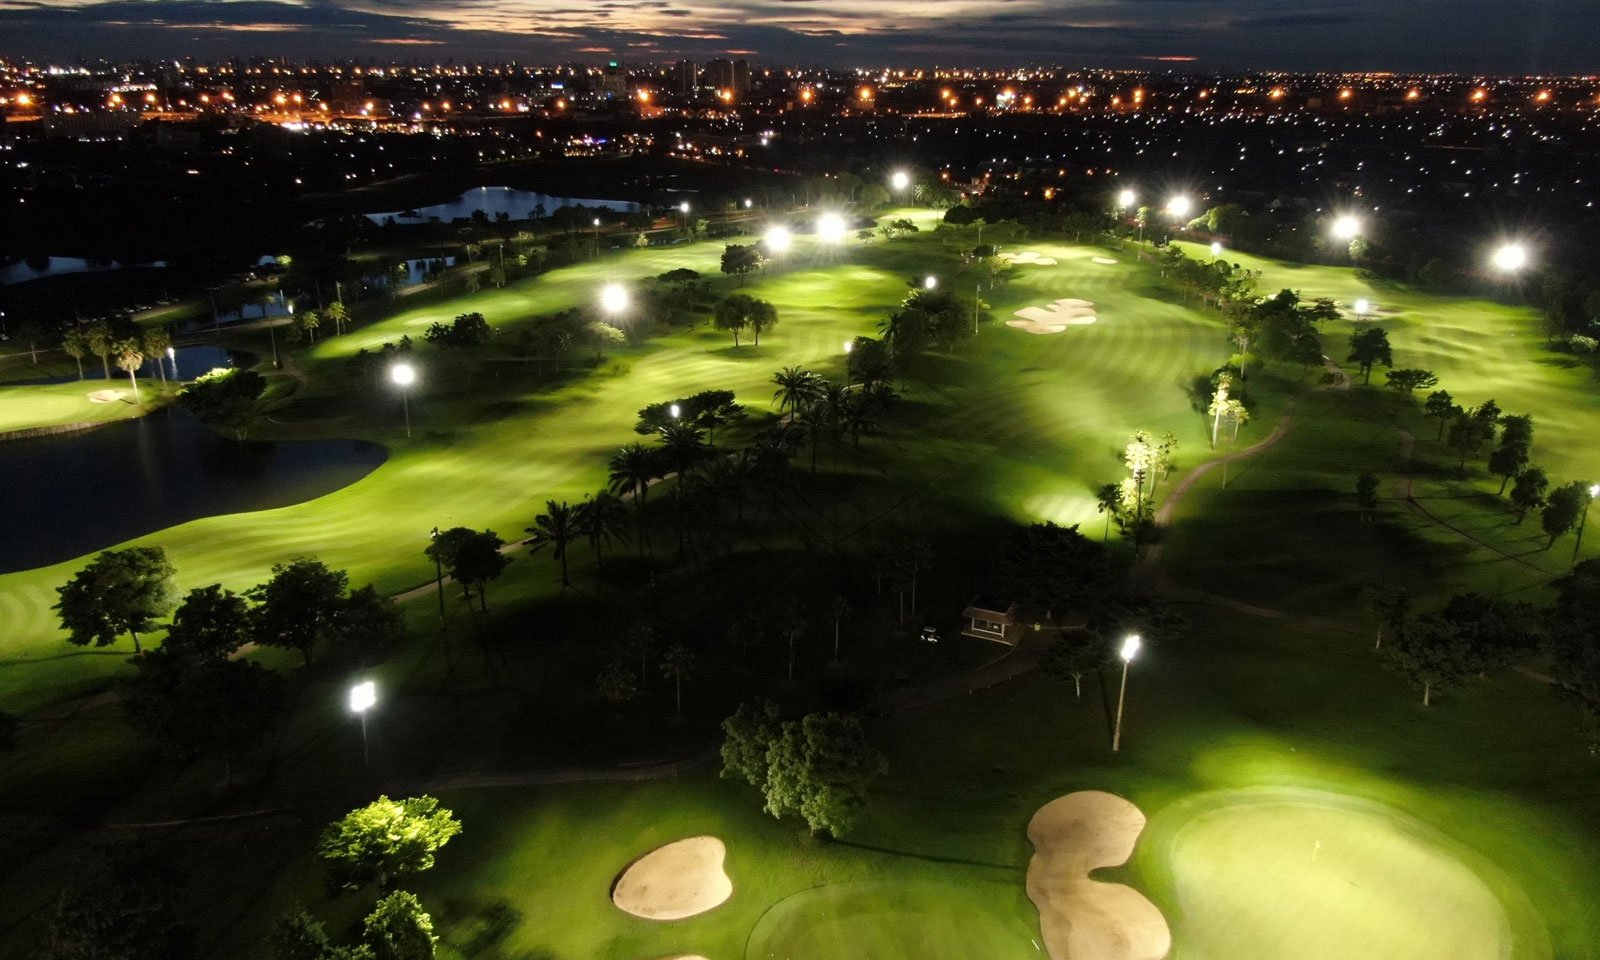 Lights-at-Indio-Golf-Course